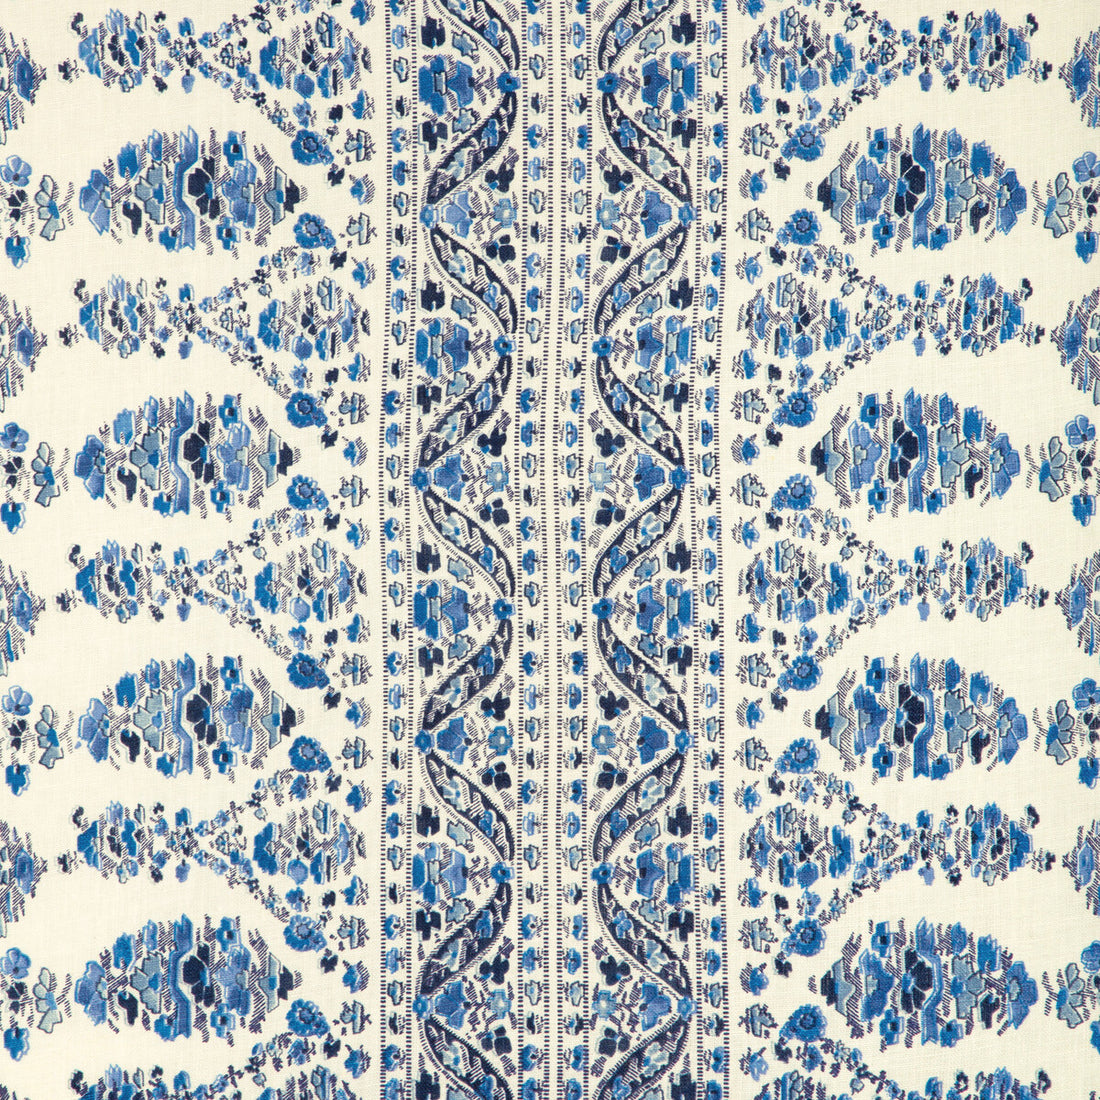 Visan Print fabric in navy/sky color - pattern 8023108.550.0 - by Brunschwig &amp; Fils in the Cadenet collection